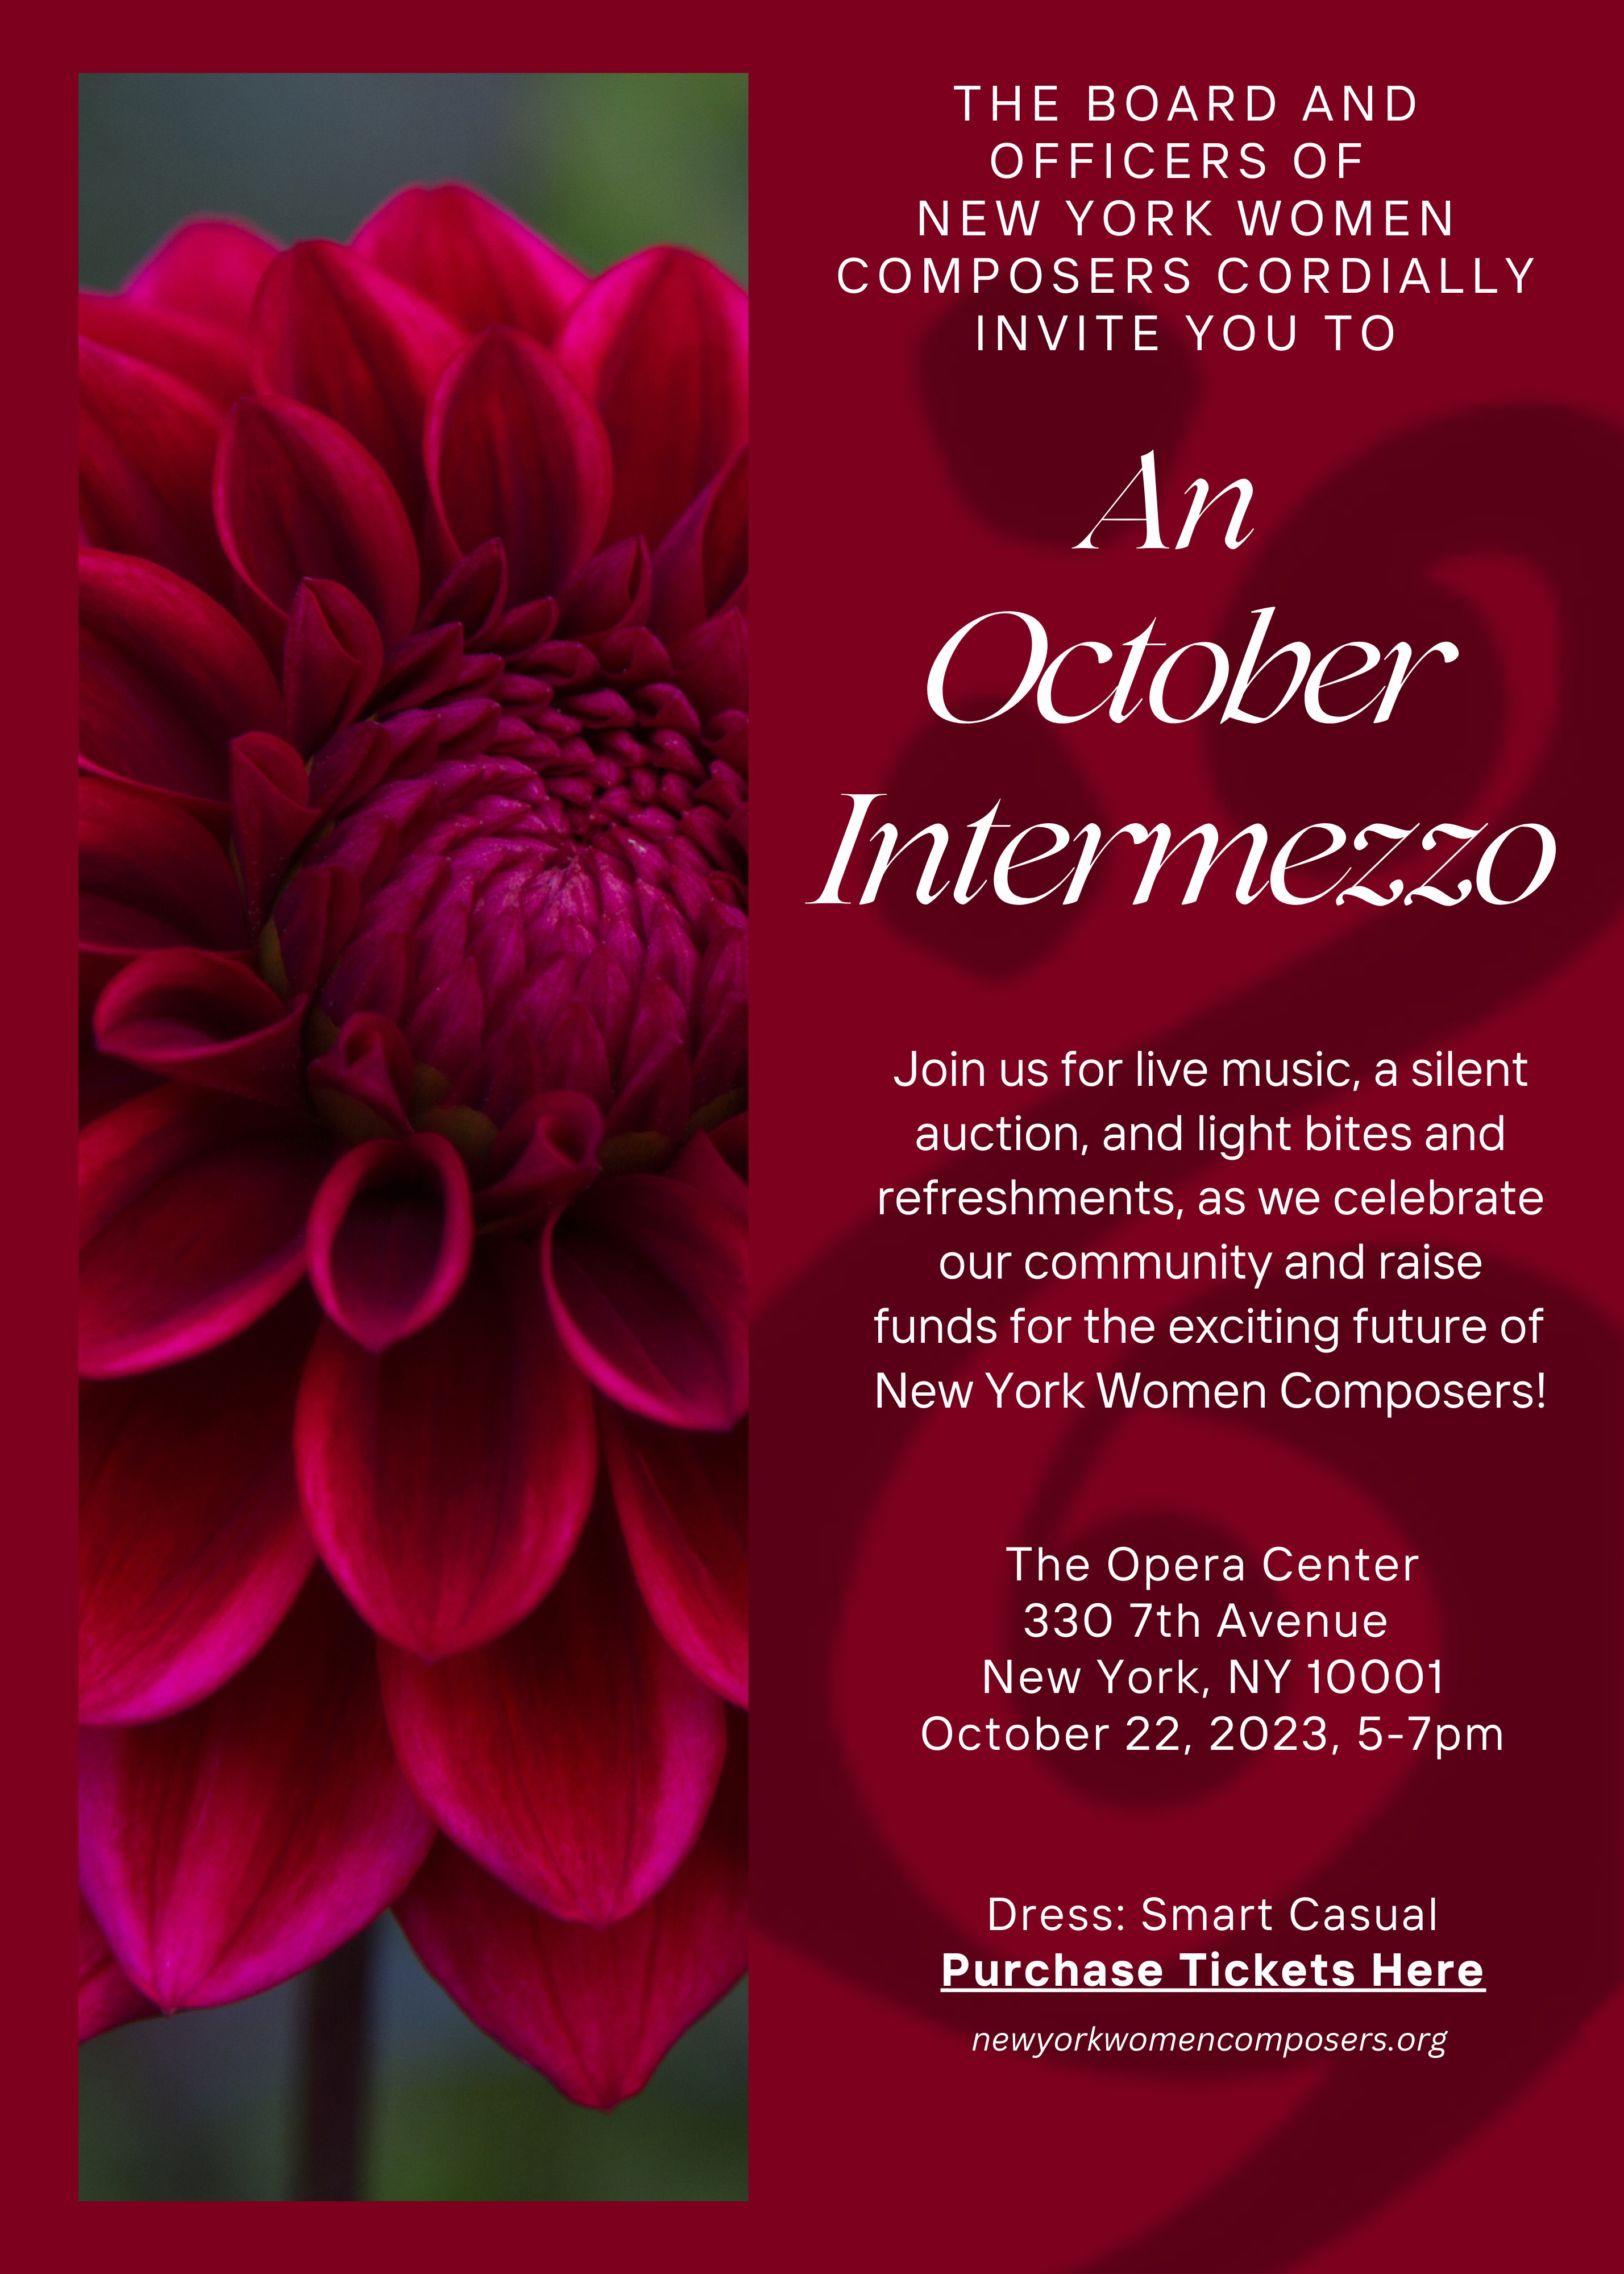 You’re Invited to An October Intermezzo: New York Women Composers 2023 Gala on October 22, 5-7PM